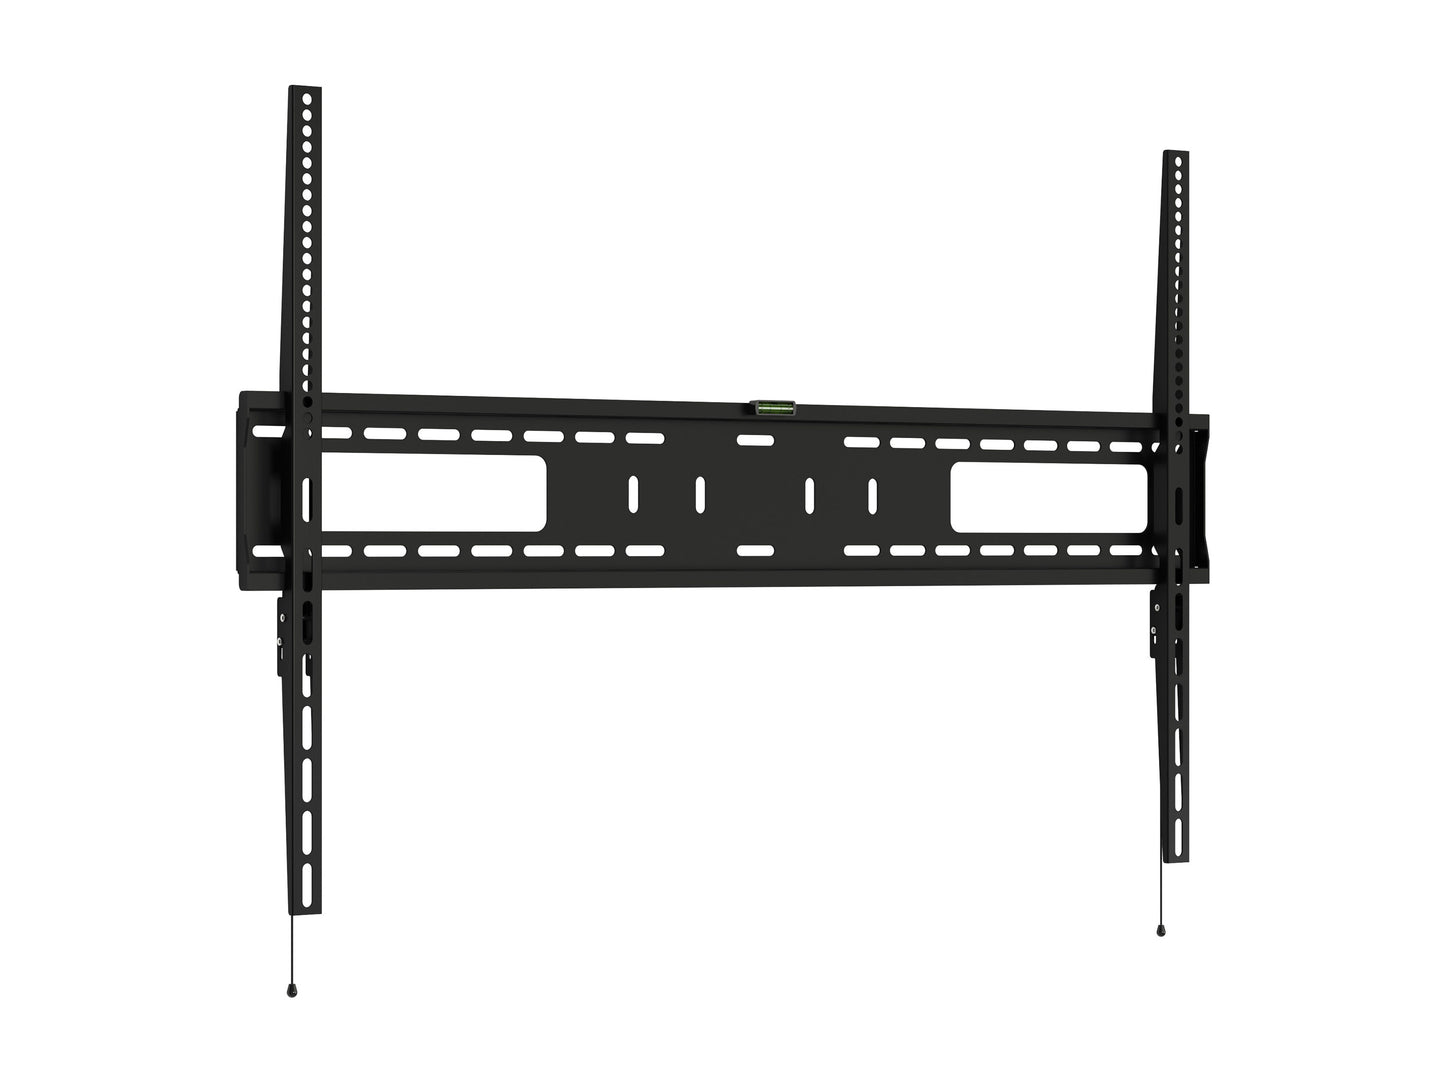 Fixed Wall Mount for Large TV's up to 100"